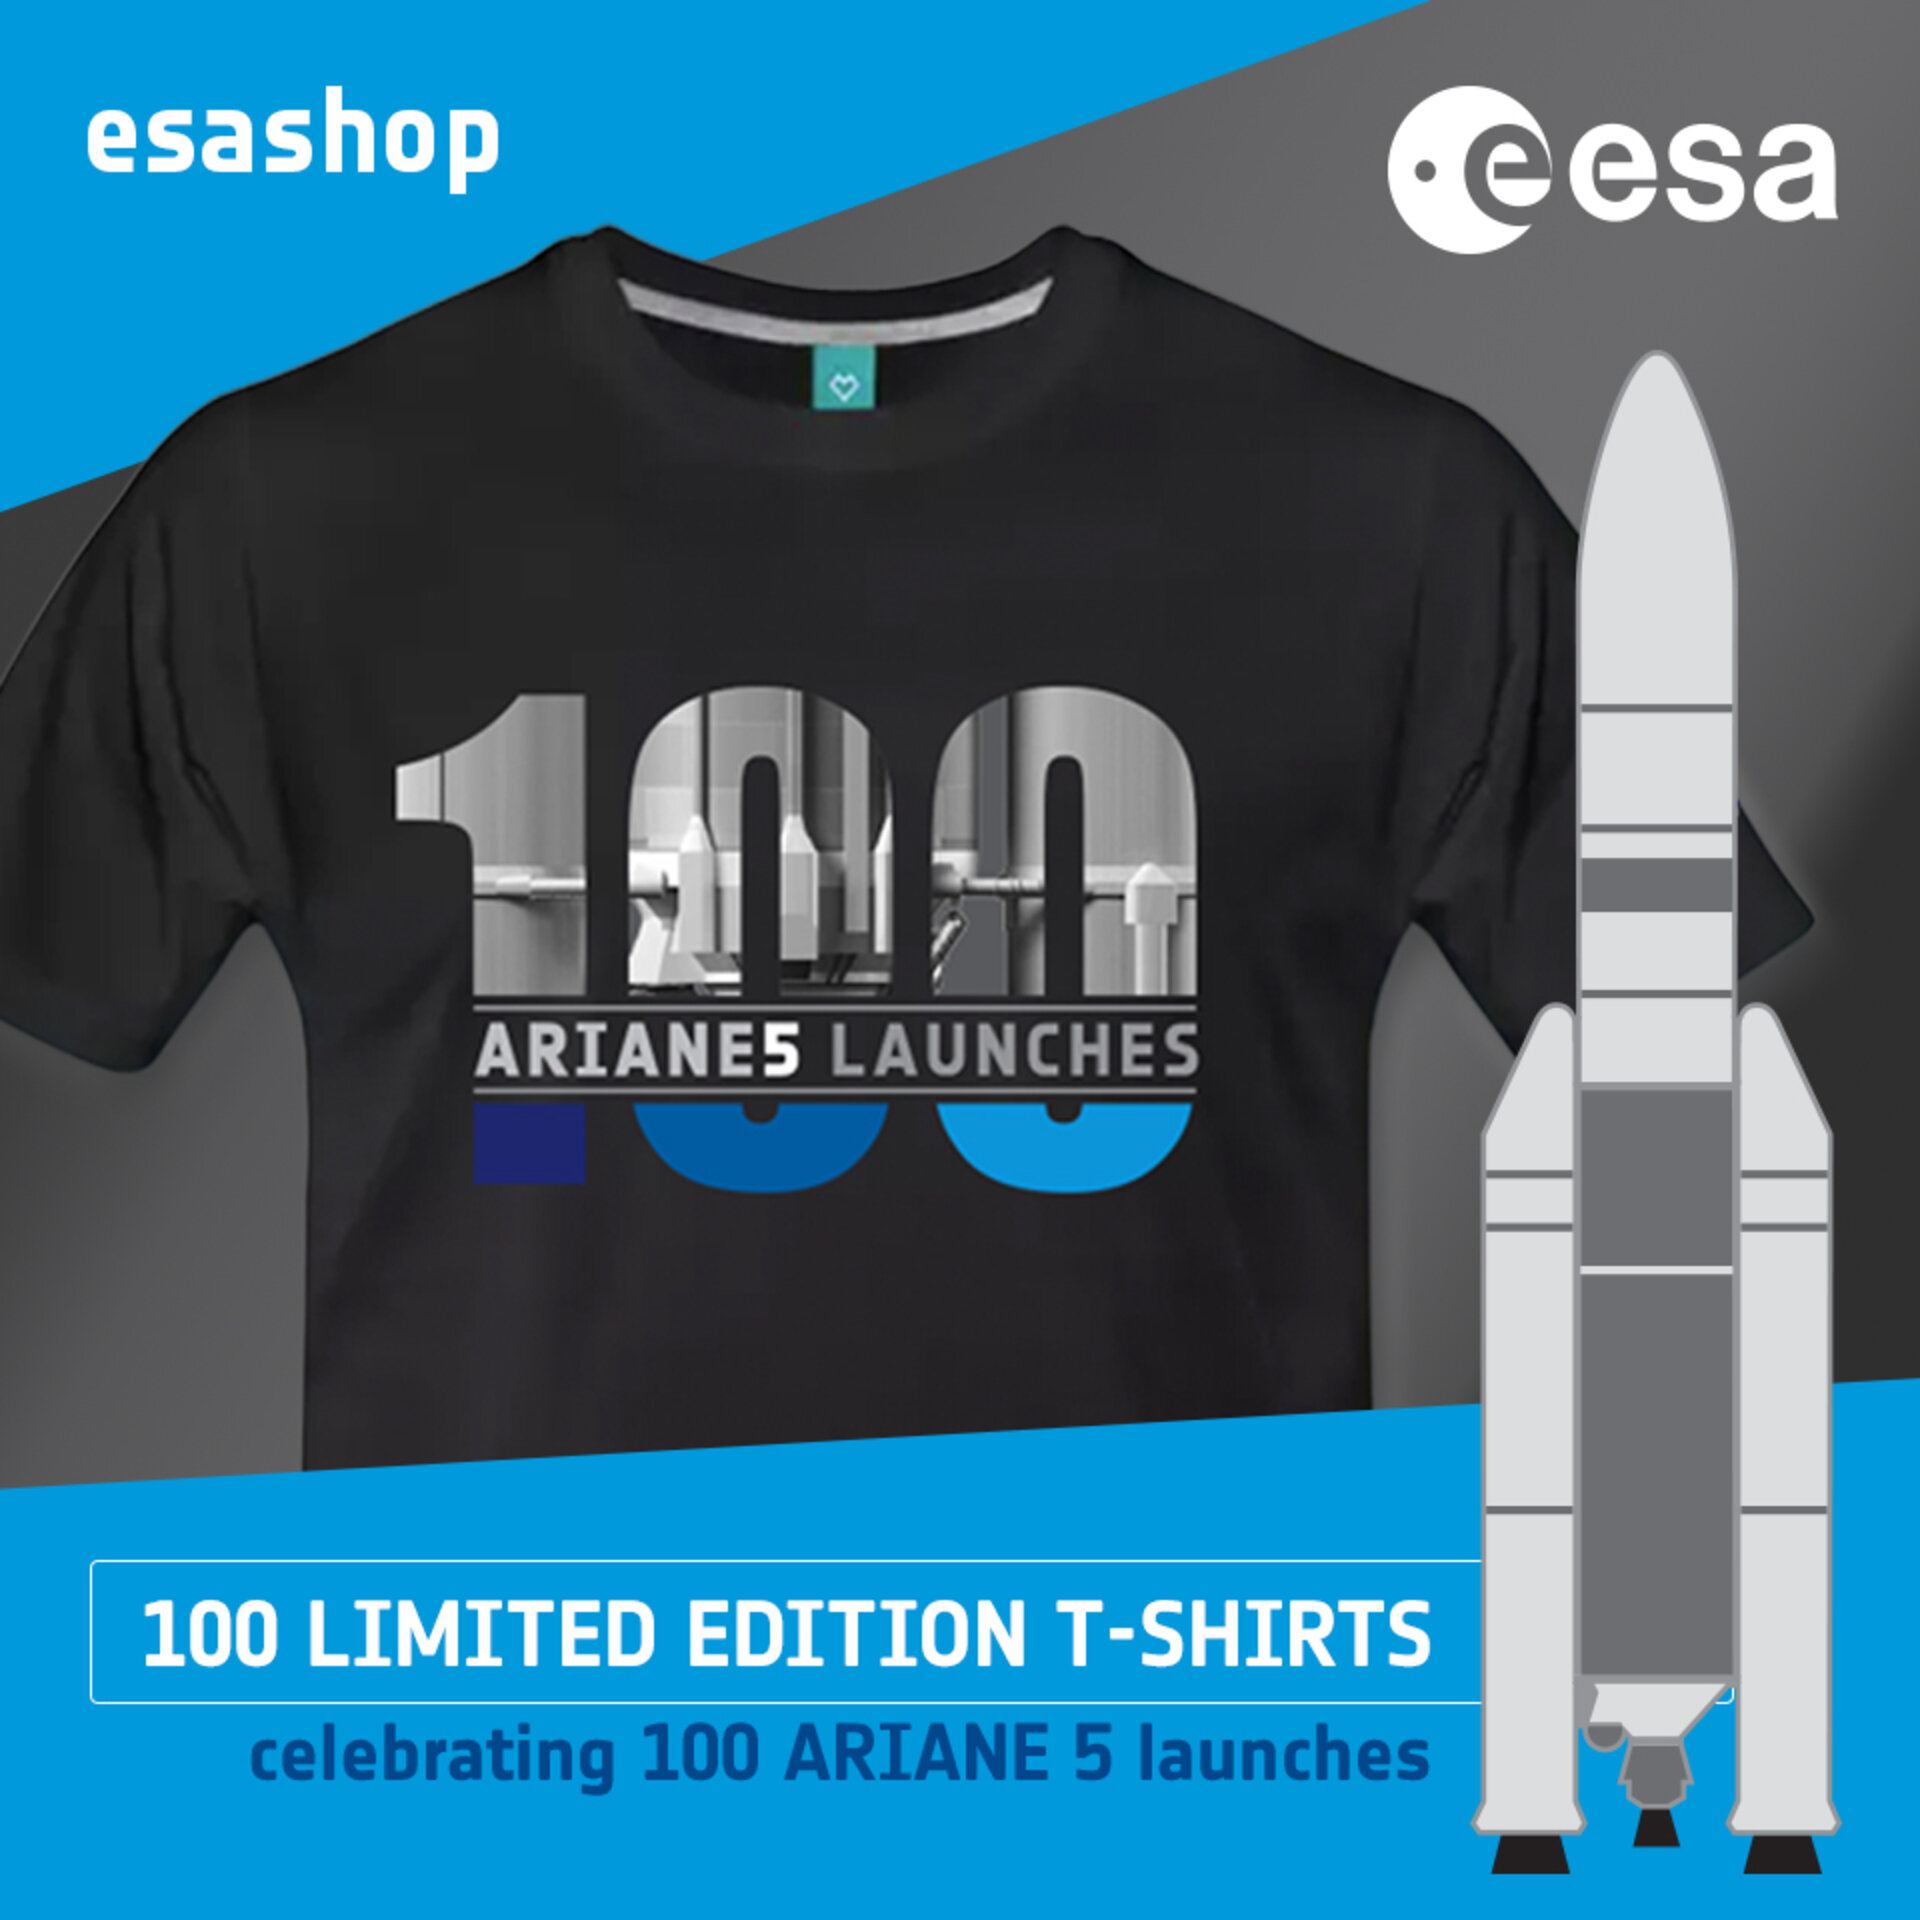 Limited edition t-shirts celebrating 100 Ariane 5 launches